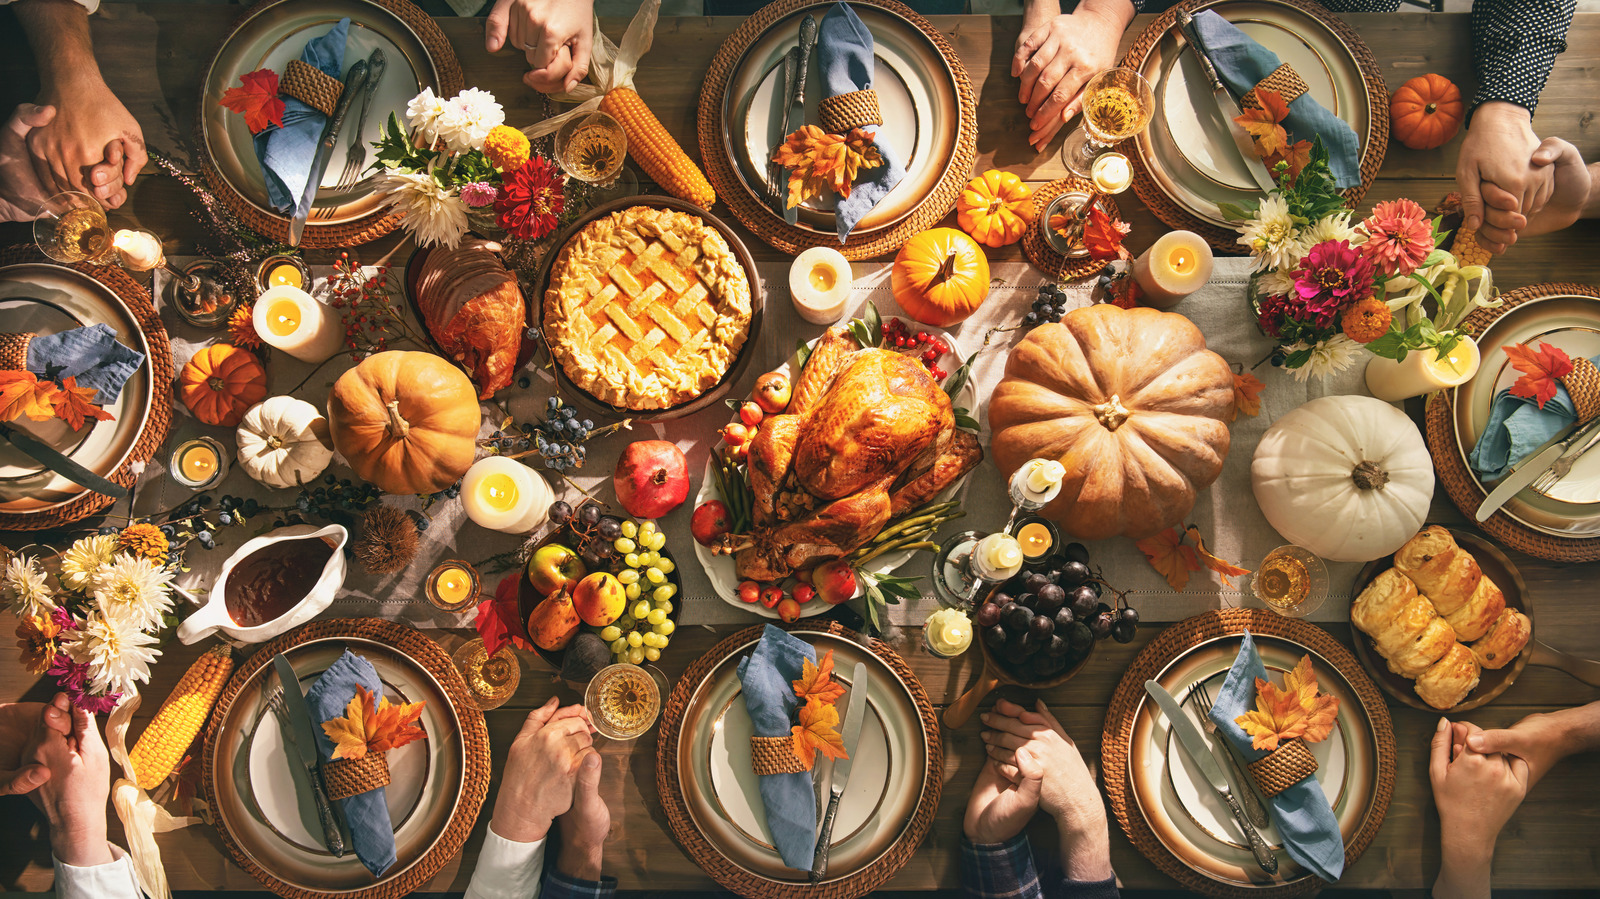 https://www.mashed.com/img/gallery/thanksgiving-dinner-hacks-youll-wish-you-knew-sooner/l-intro-1661166450.jpg